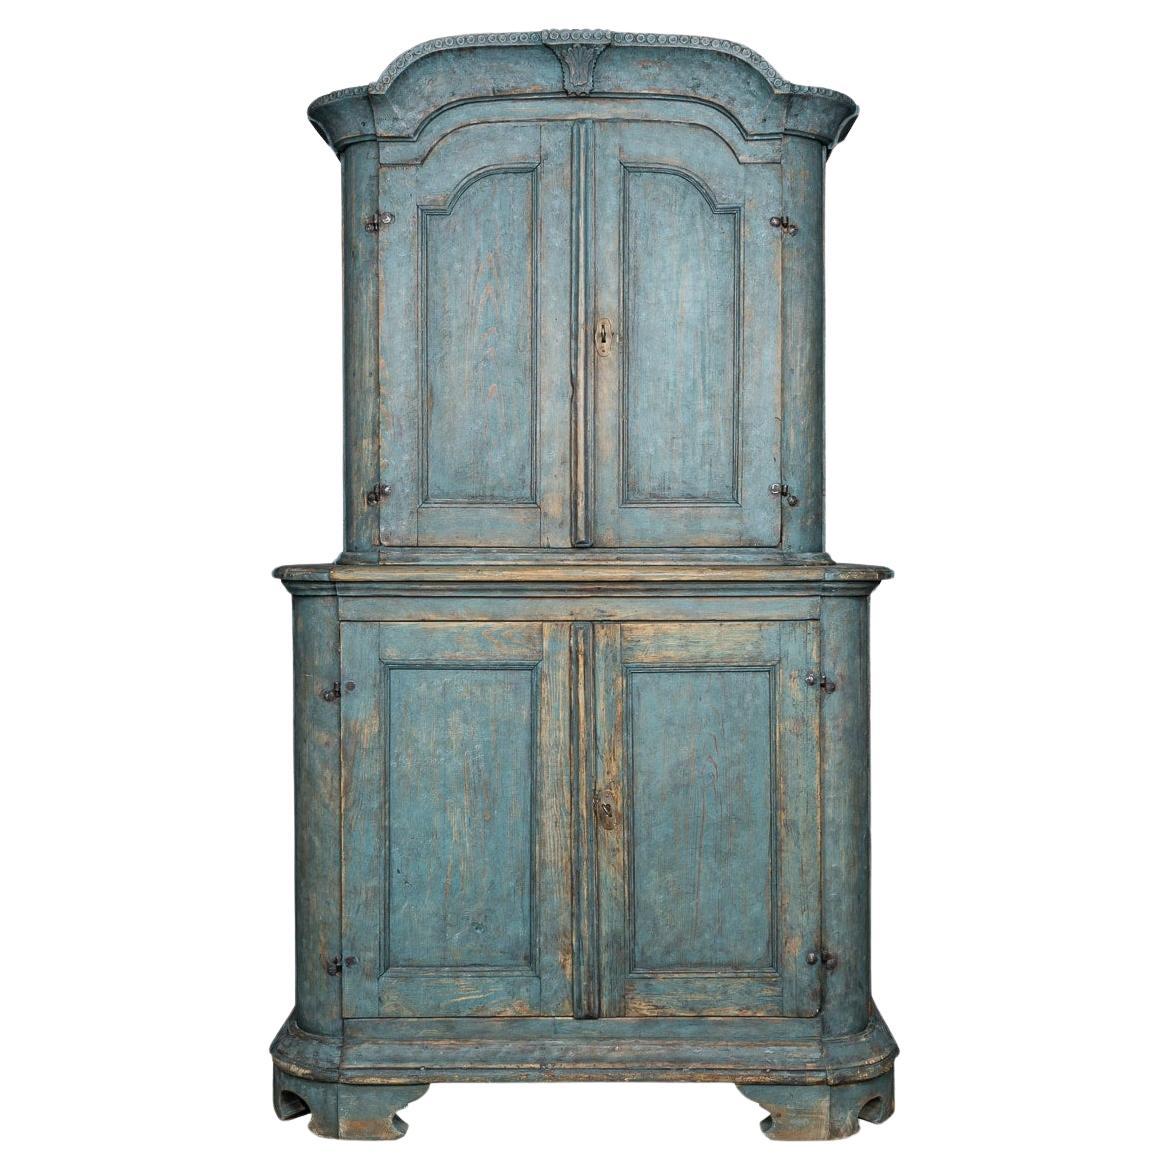 Antique 19th Century French Blue Painted Pine Wood Cupboard c.1880